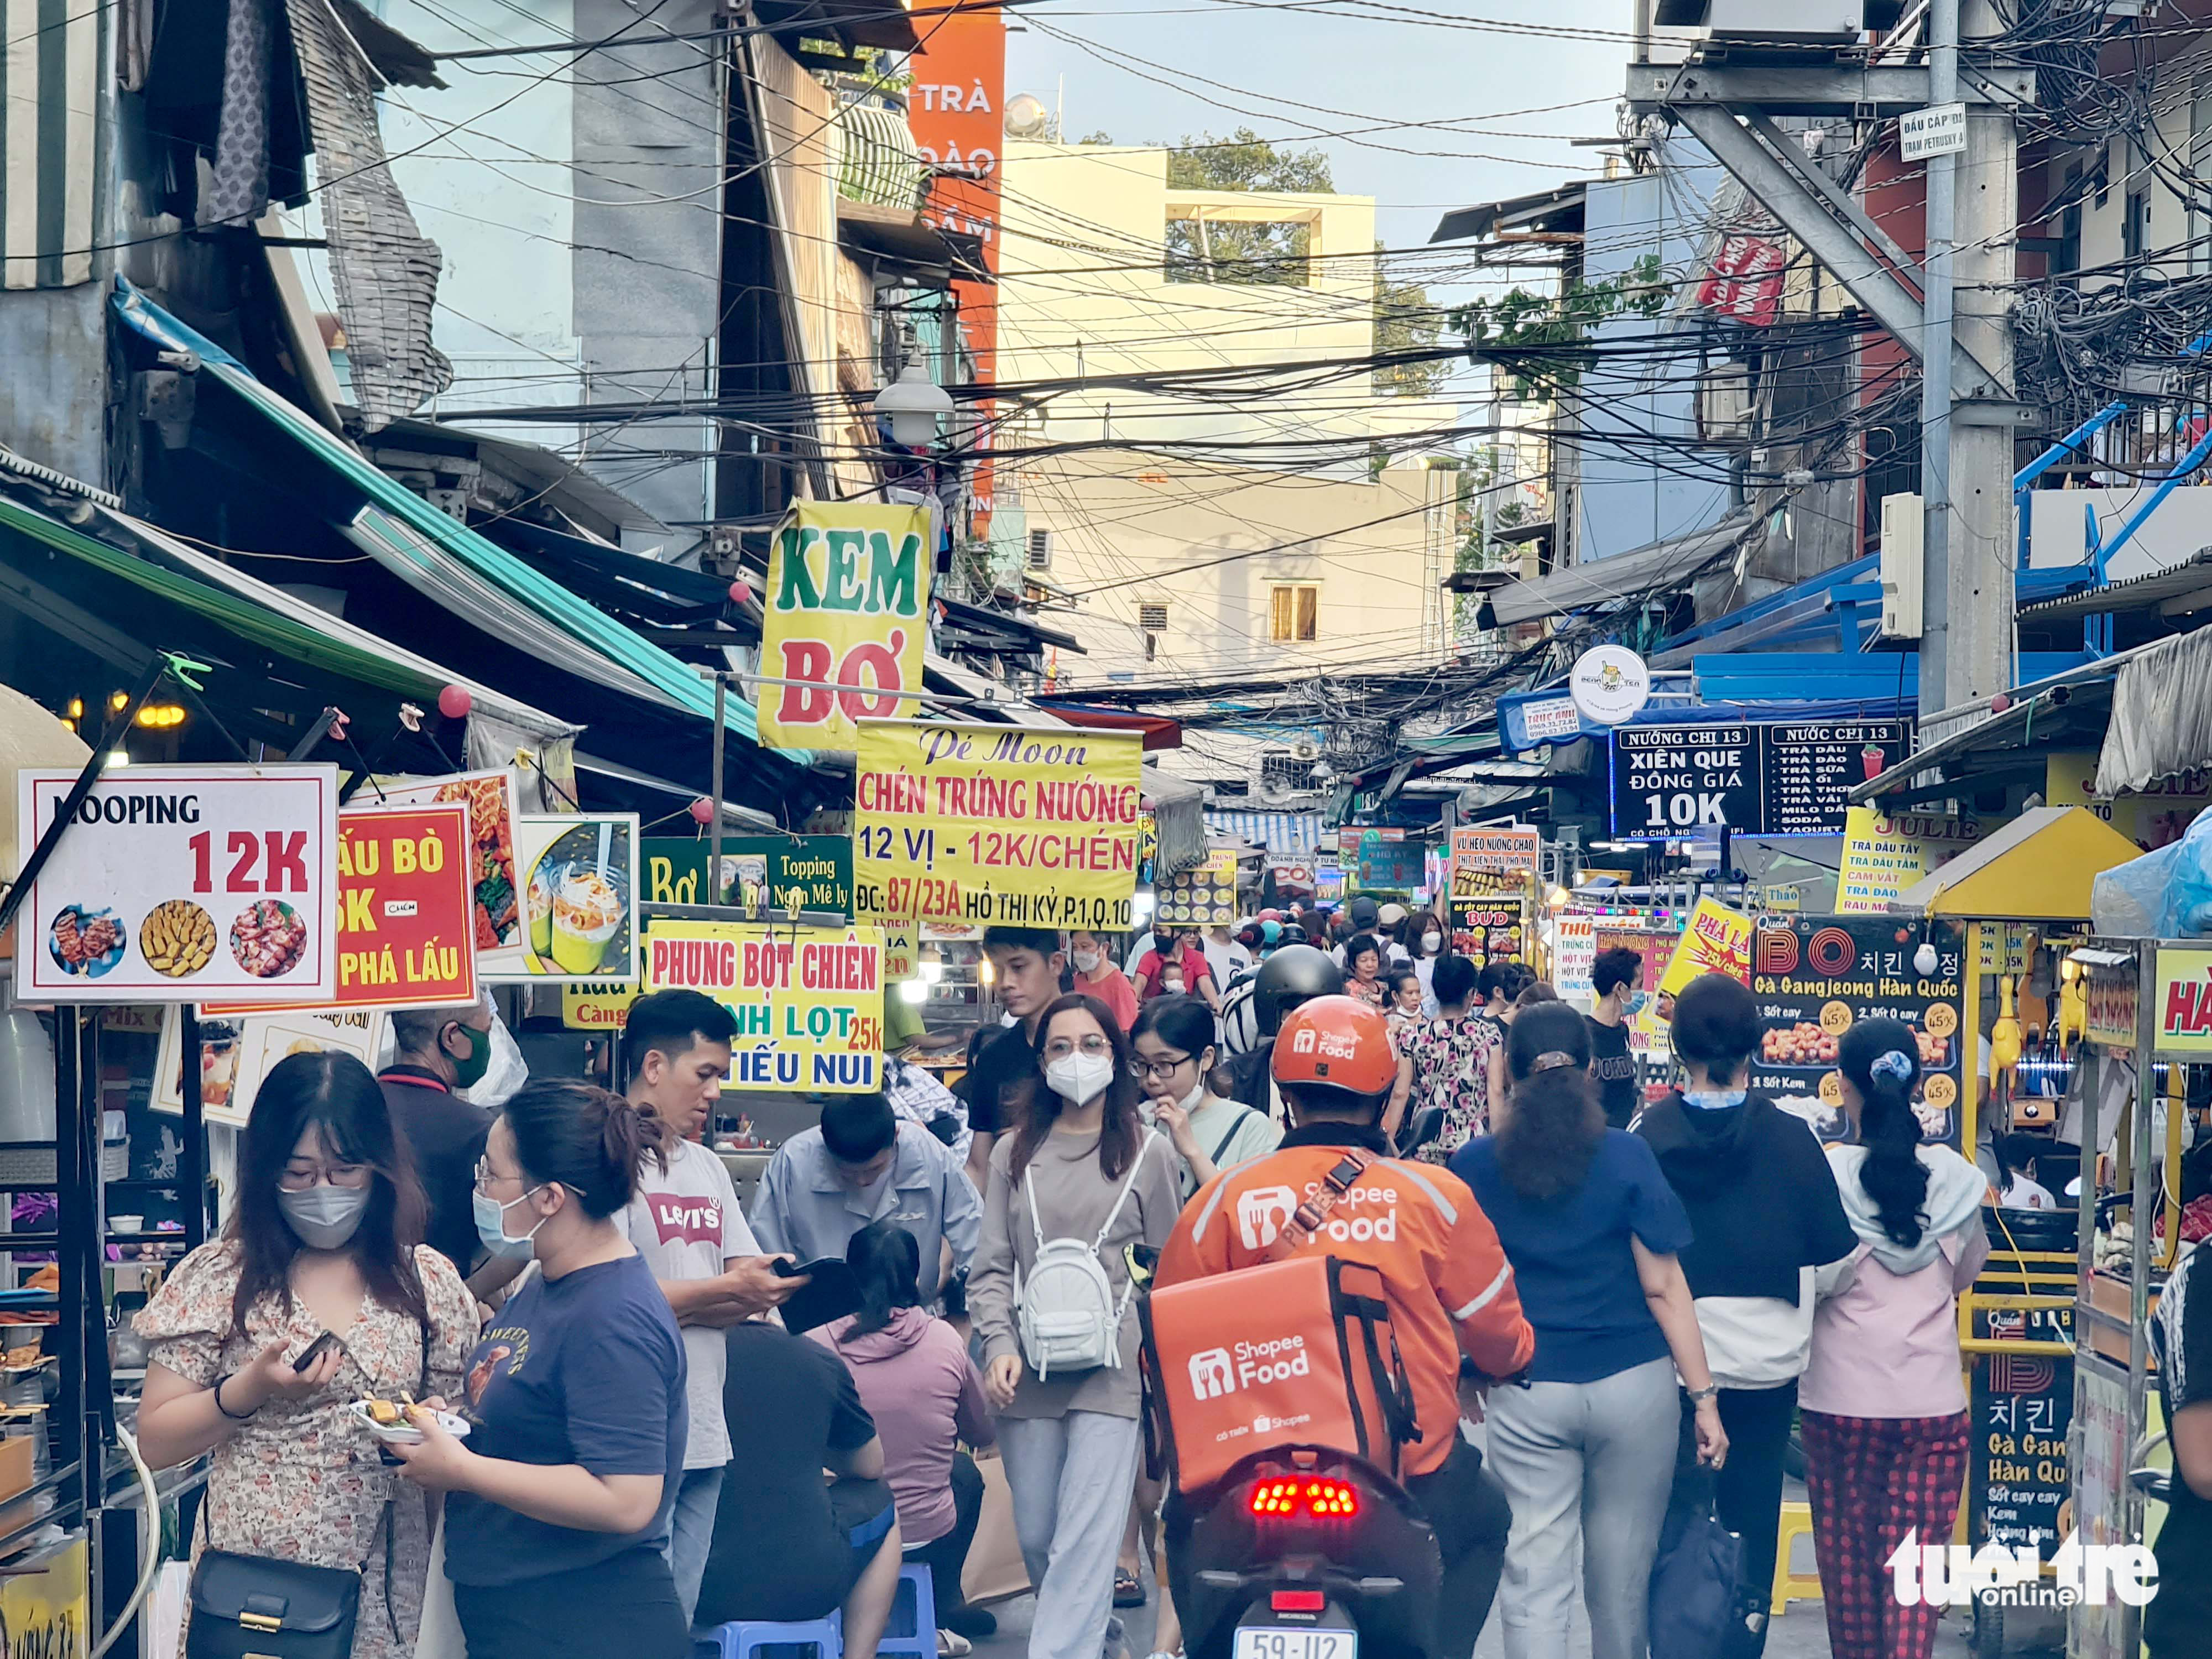 Ho Chi Minh City markets filled with visitors as COVID-19 pandemic subsides